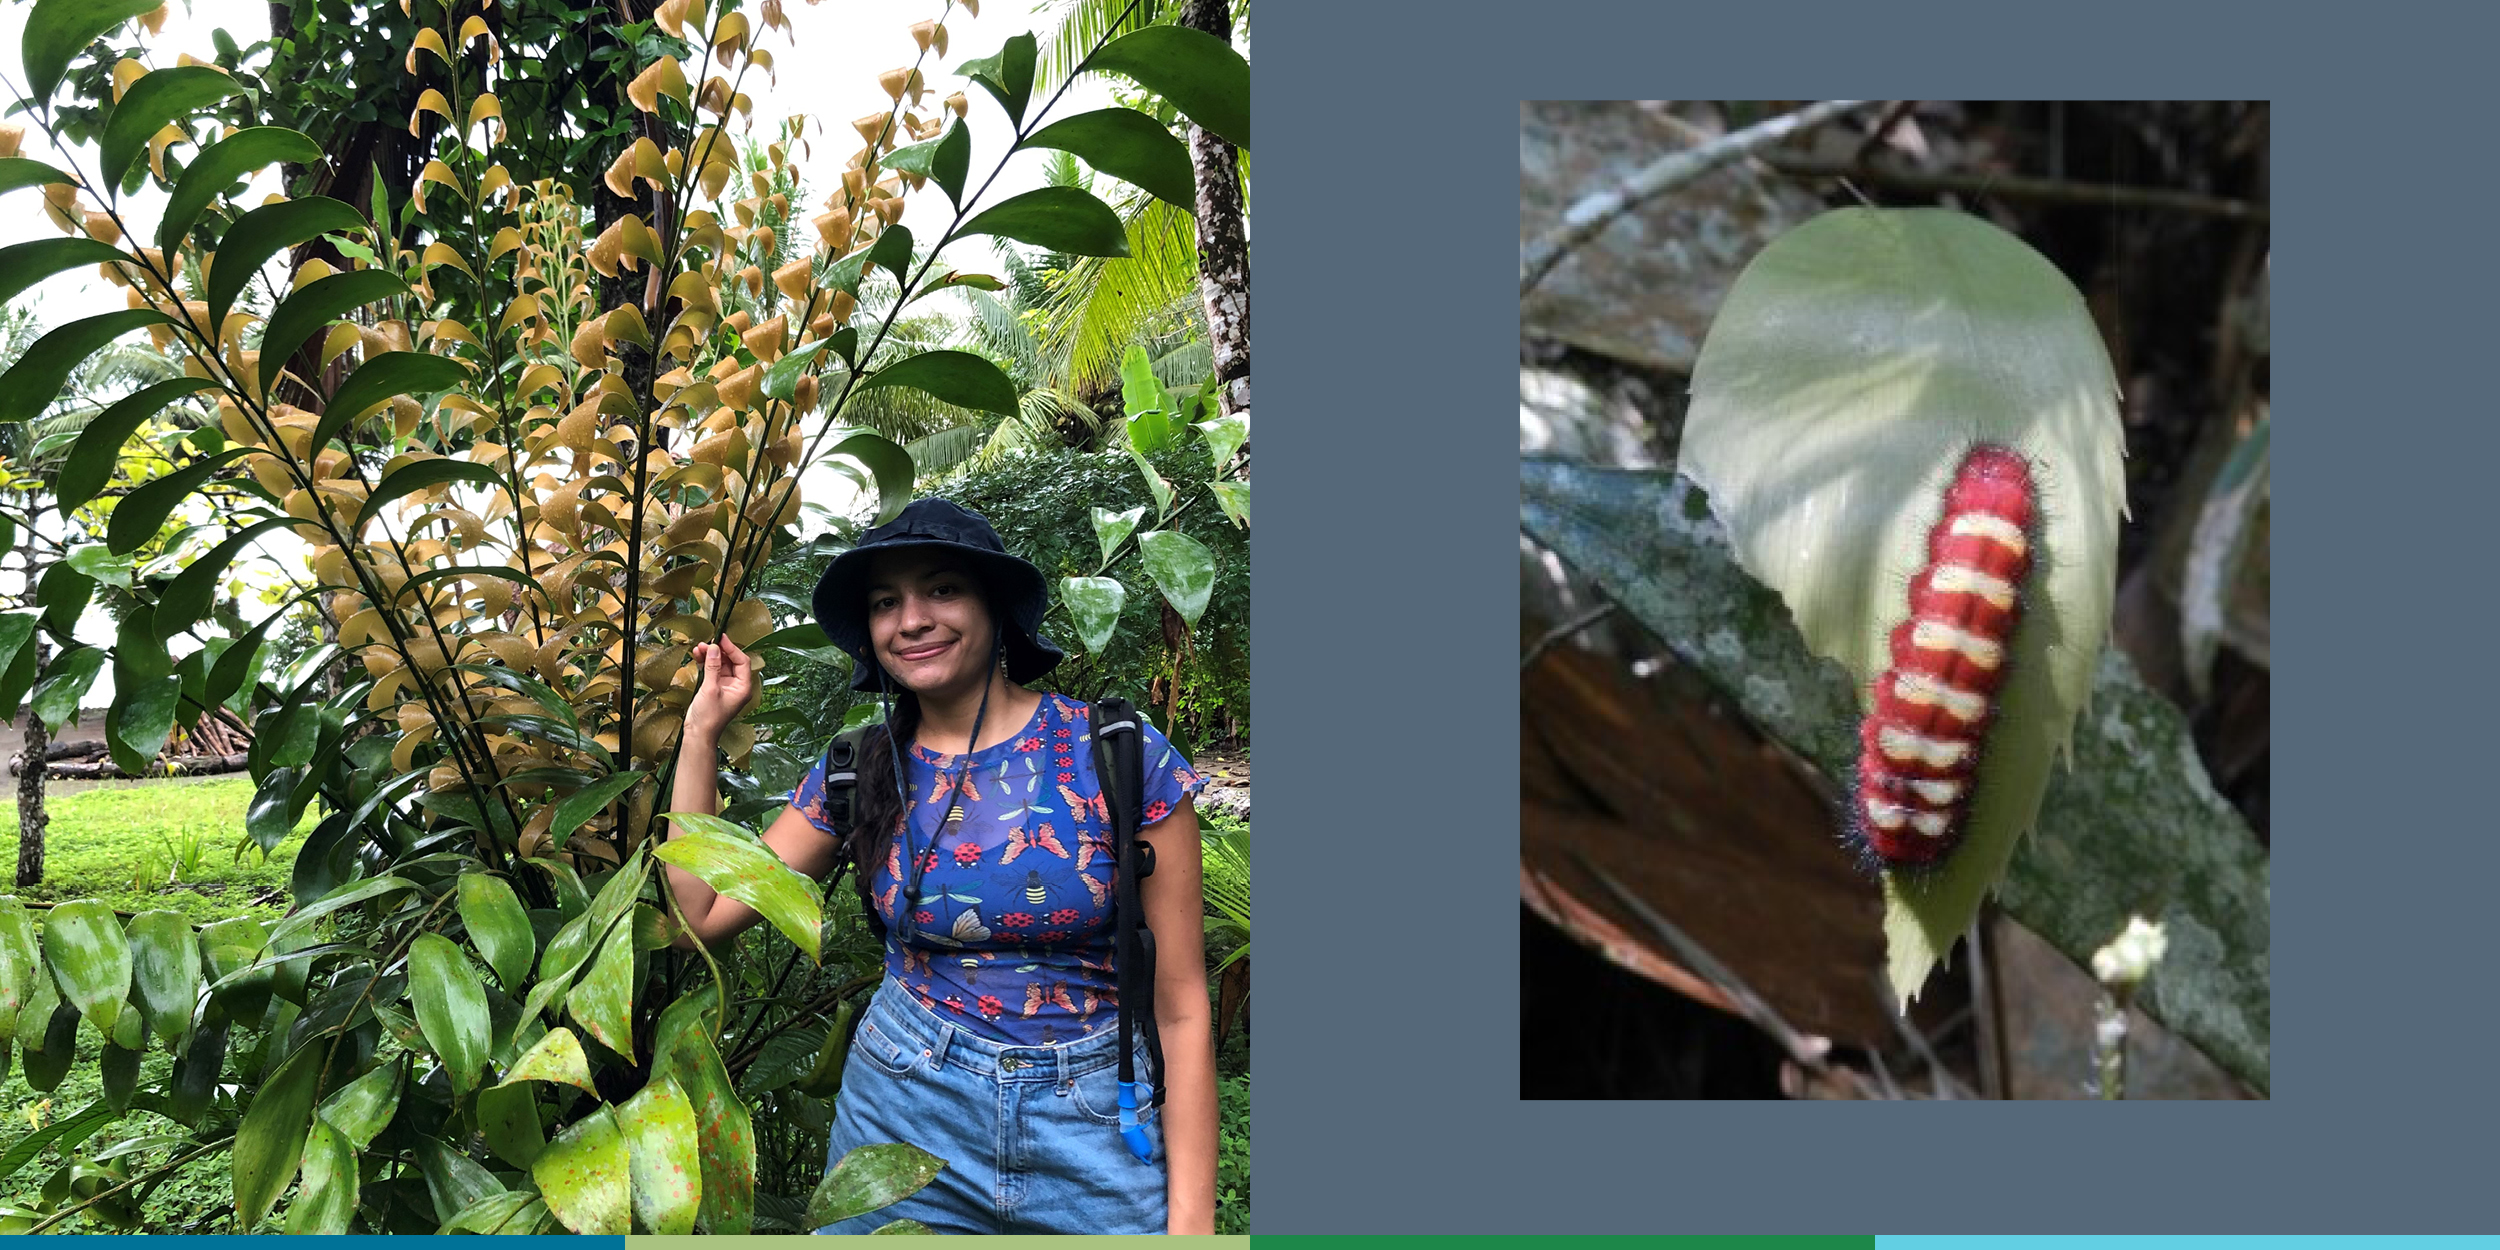 This composite image shows, on the left, a smiling young woman standing beside a green and brown cycad bush and, on the right, a distinctively marked red and cream colored caterpillar